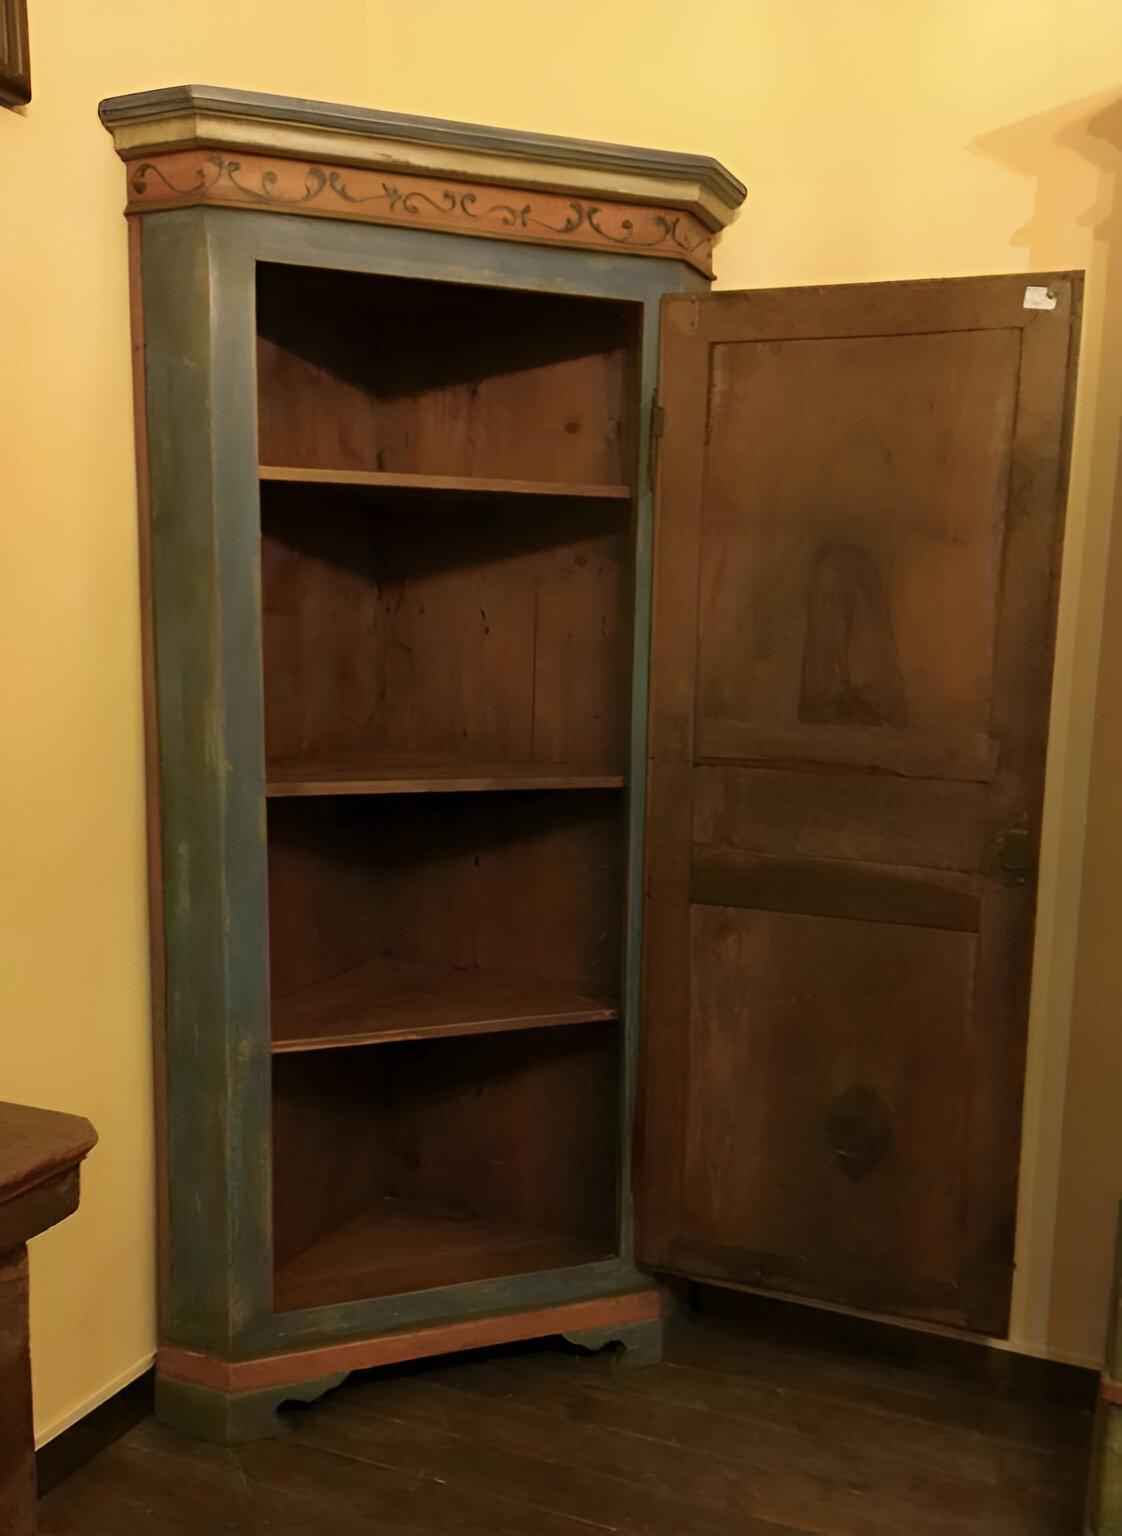 Corner decorated late 19th century period.
Place of origin Italy, South Tyrol.
Painted fir corner cabinet with walnut door.
Painted bluish color corner cabinet with door divided into 3 panels with floral motifs.
Shelf feet, 3 interior